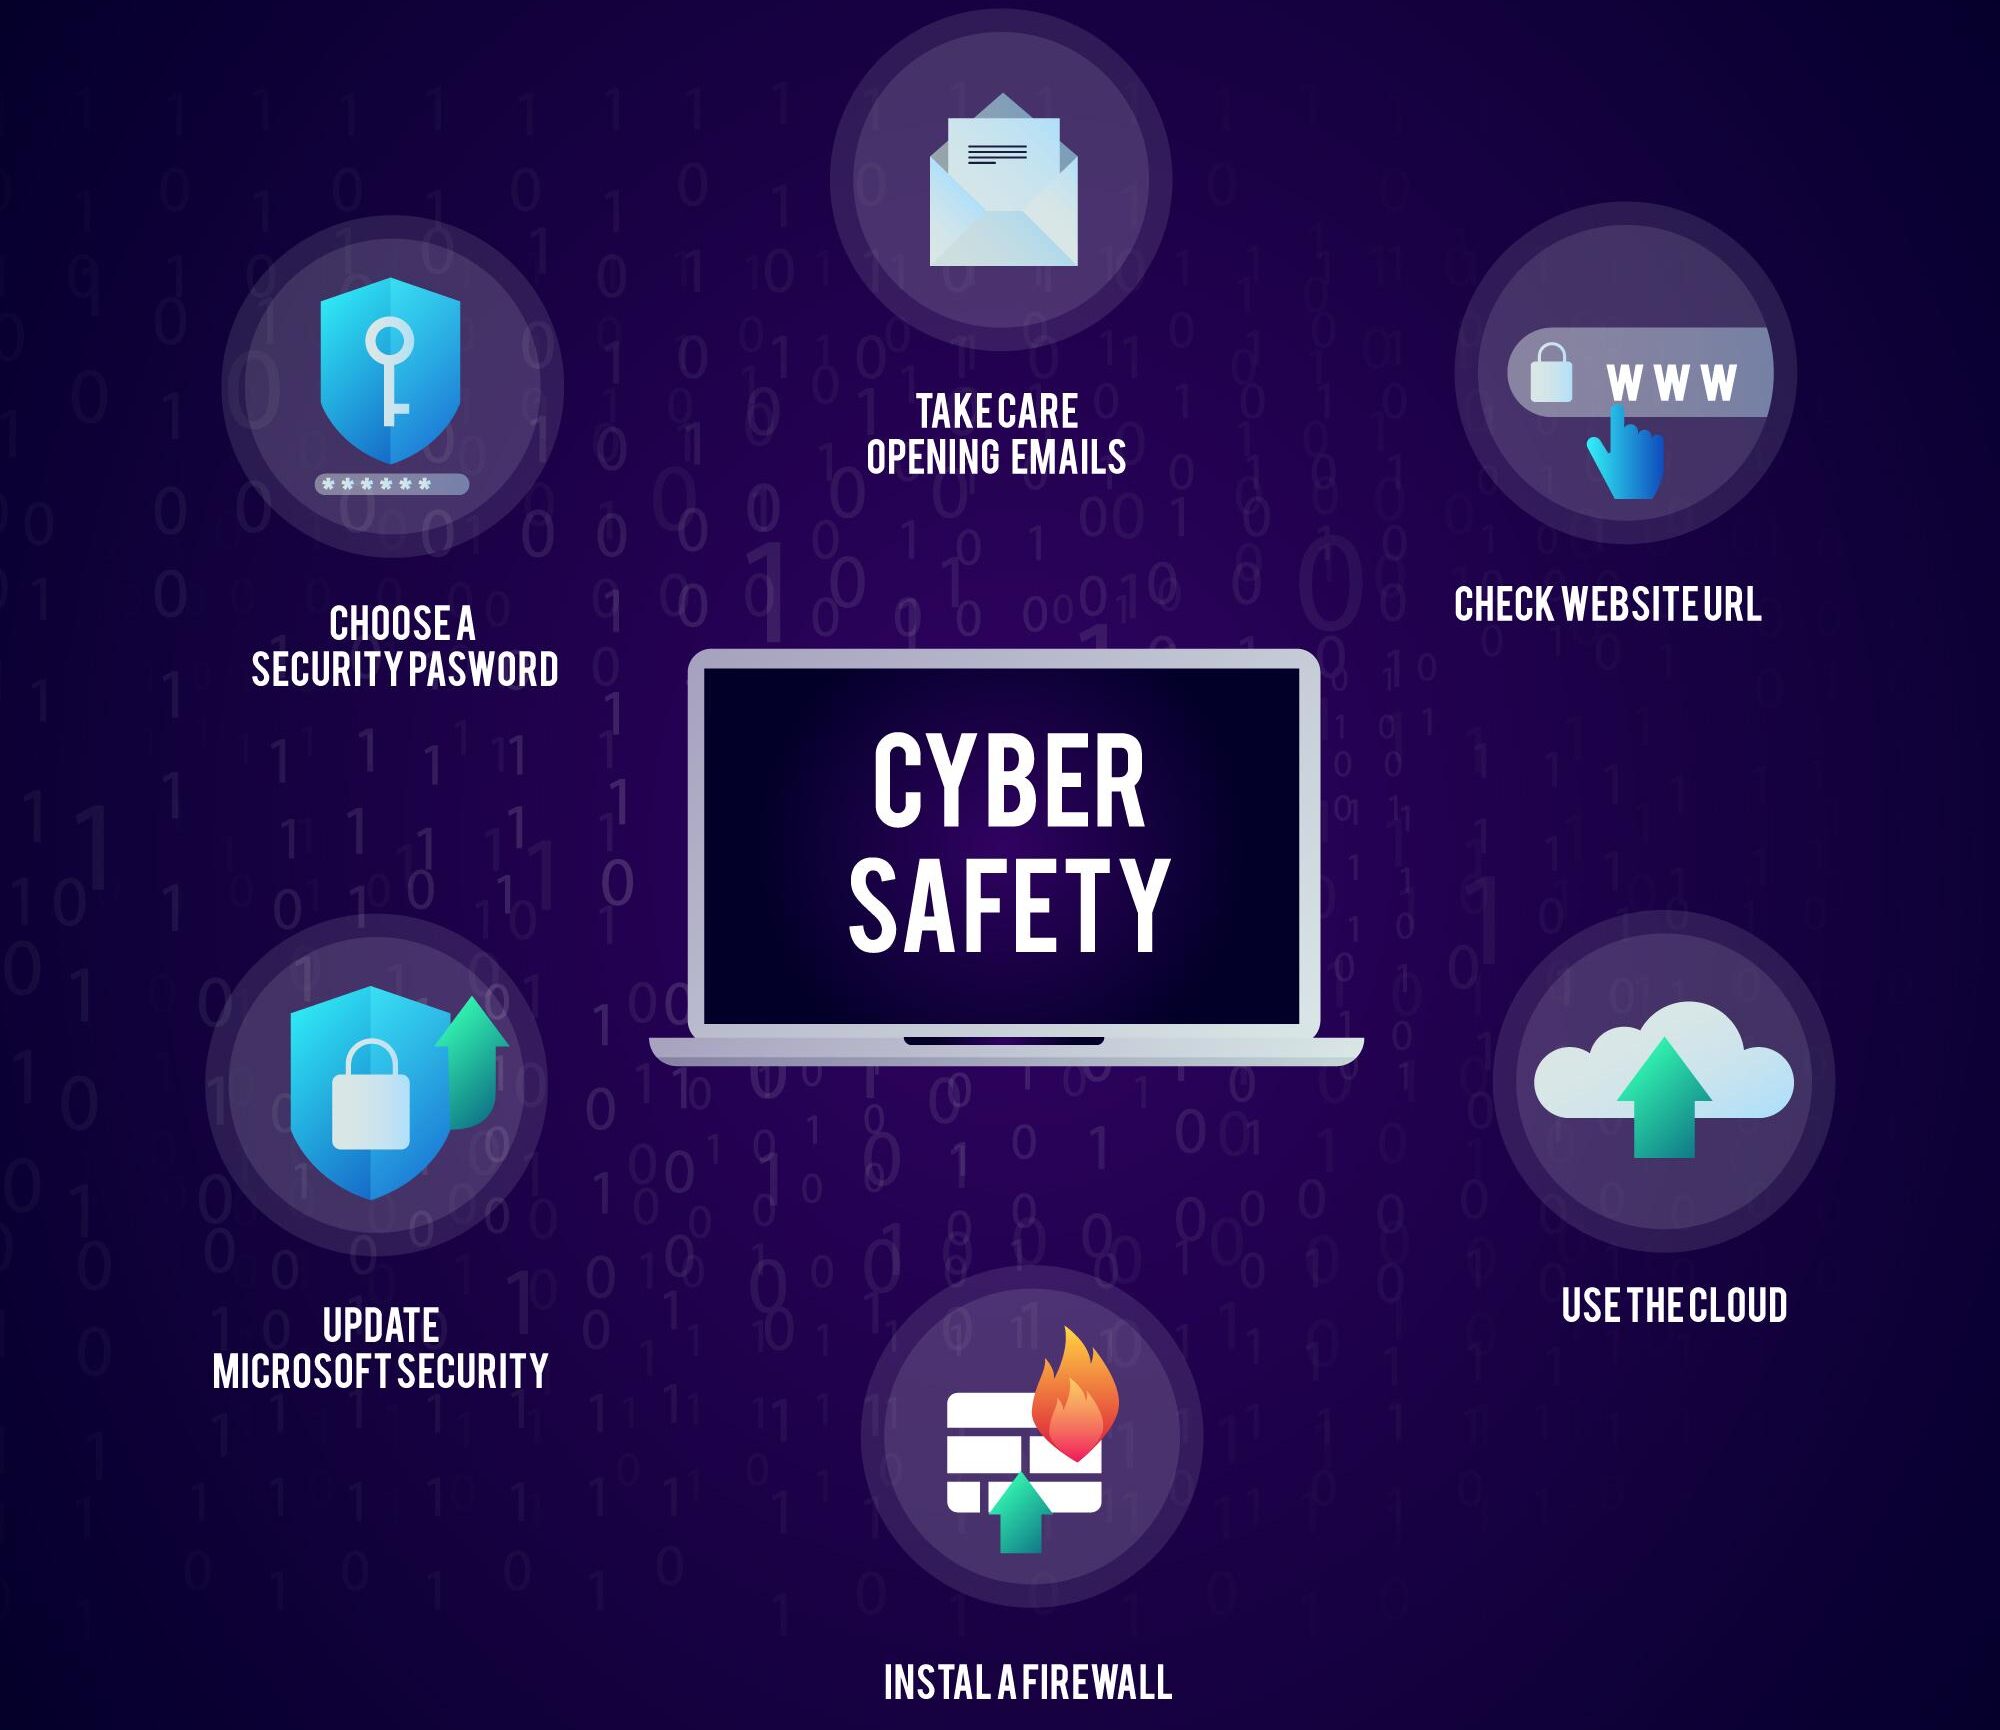 Cyber Security Tips